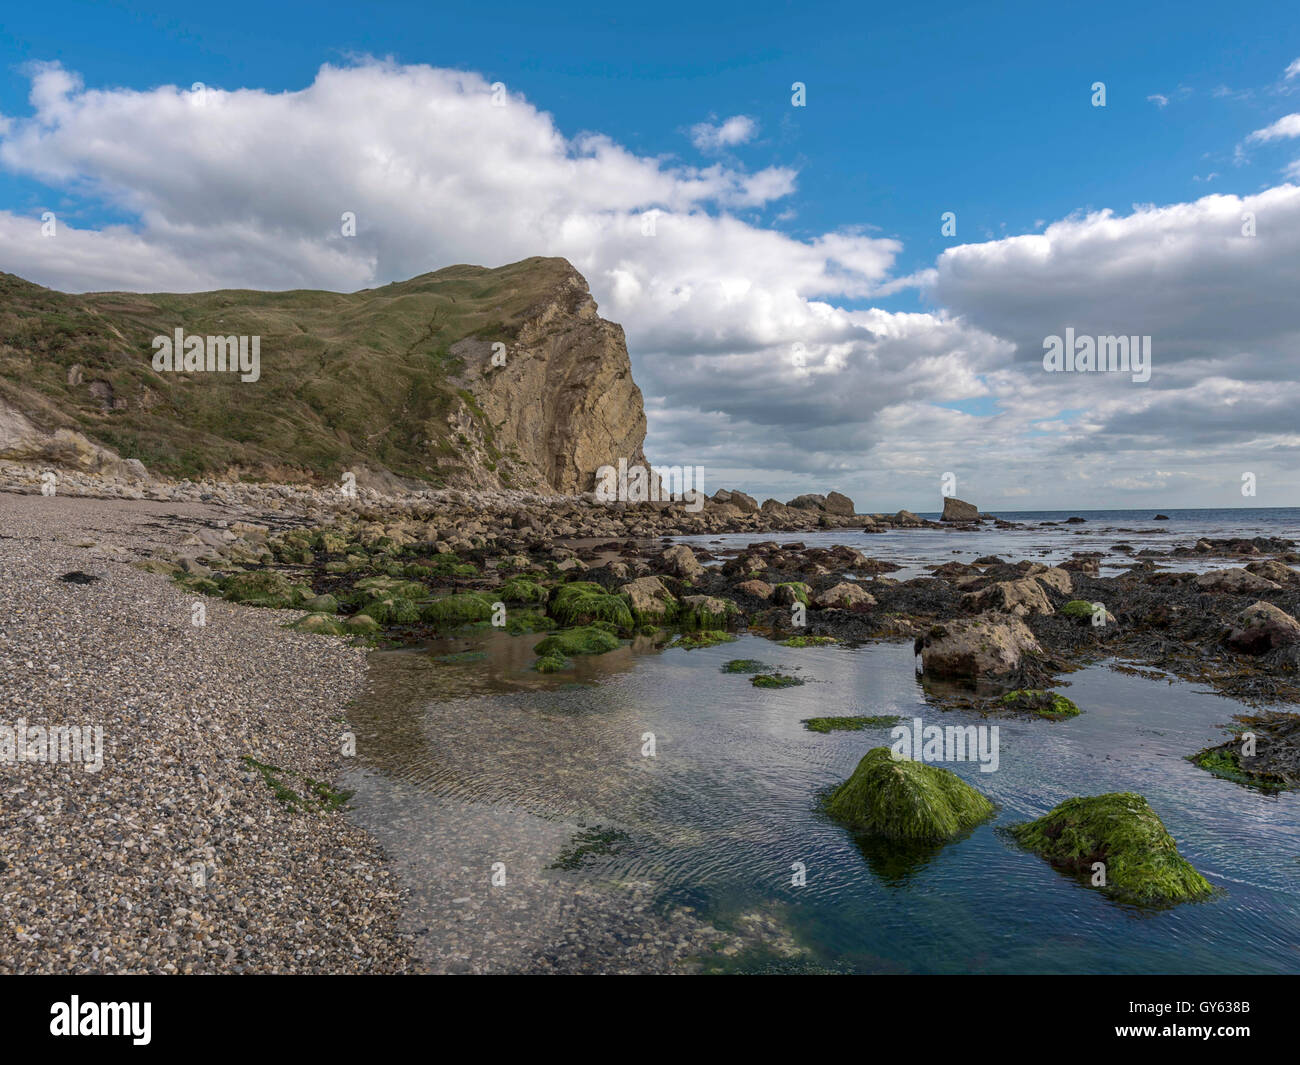 Landscape depicting the rocky Jurassic shoreline at Man O'War beach, St Oswald's Bay on a fine summer day. Stock Photo